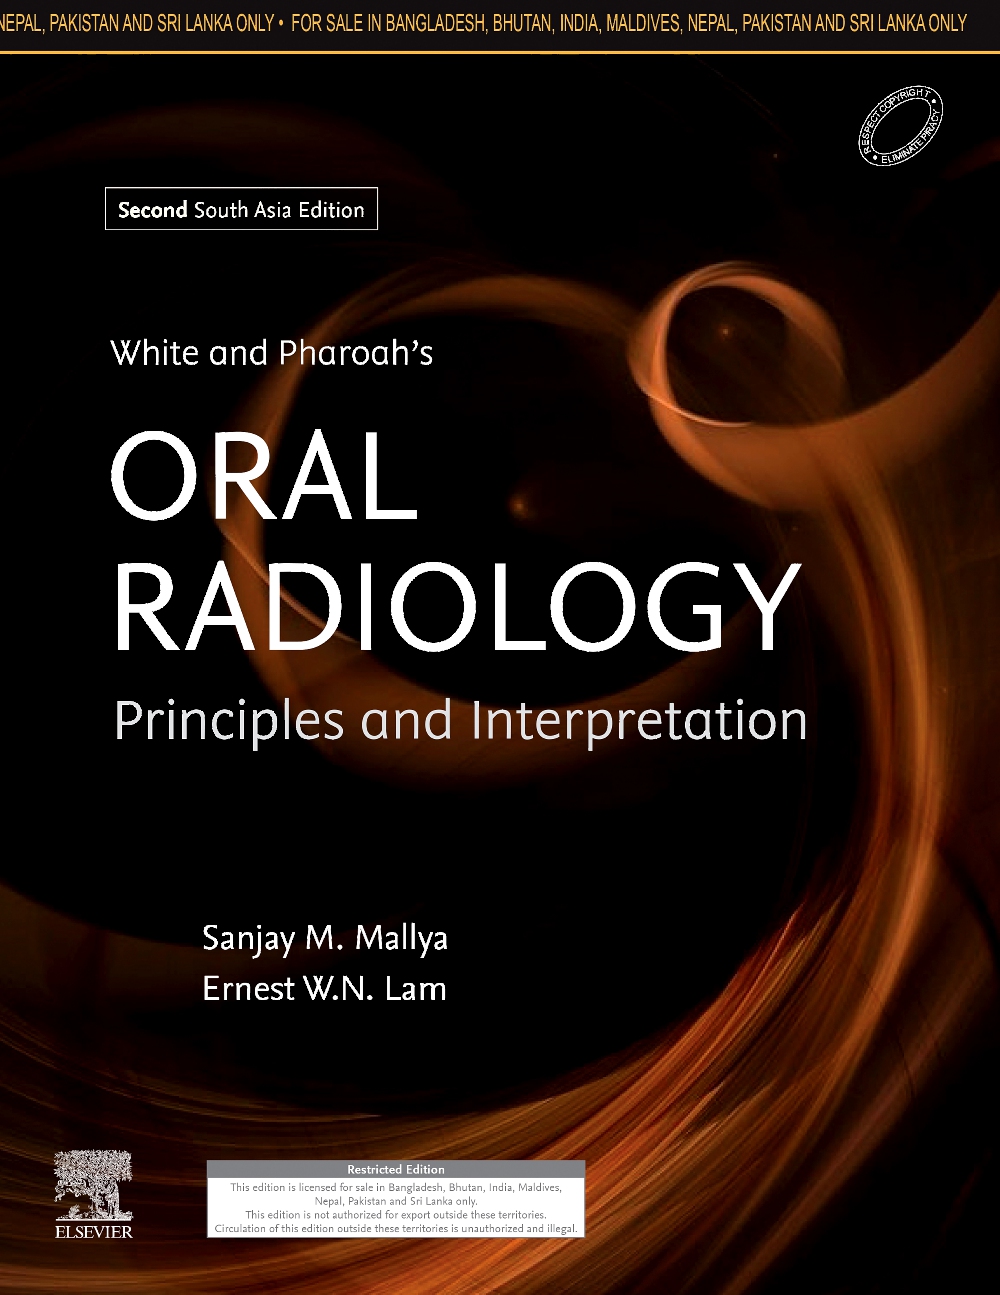 White and Pharoah's Oral Radiology: Principles and Interpretation: Second South Asia Edition